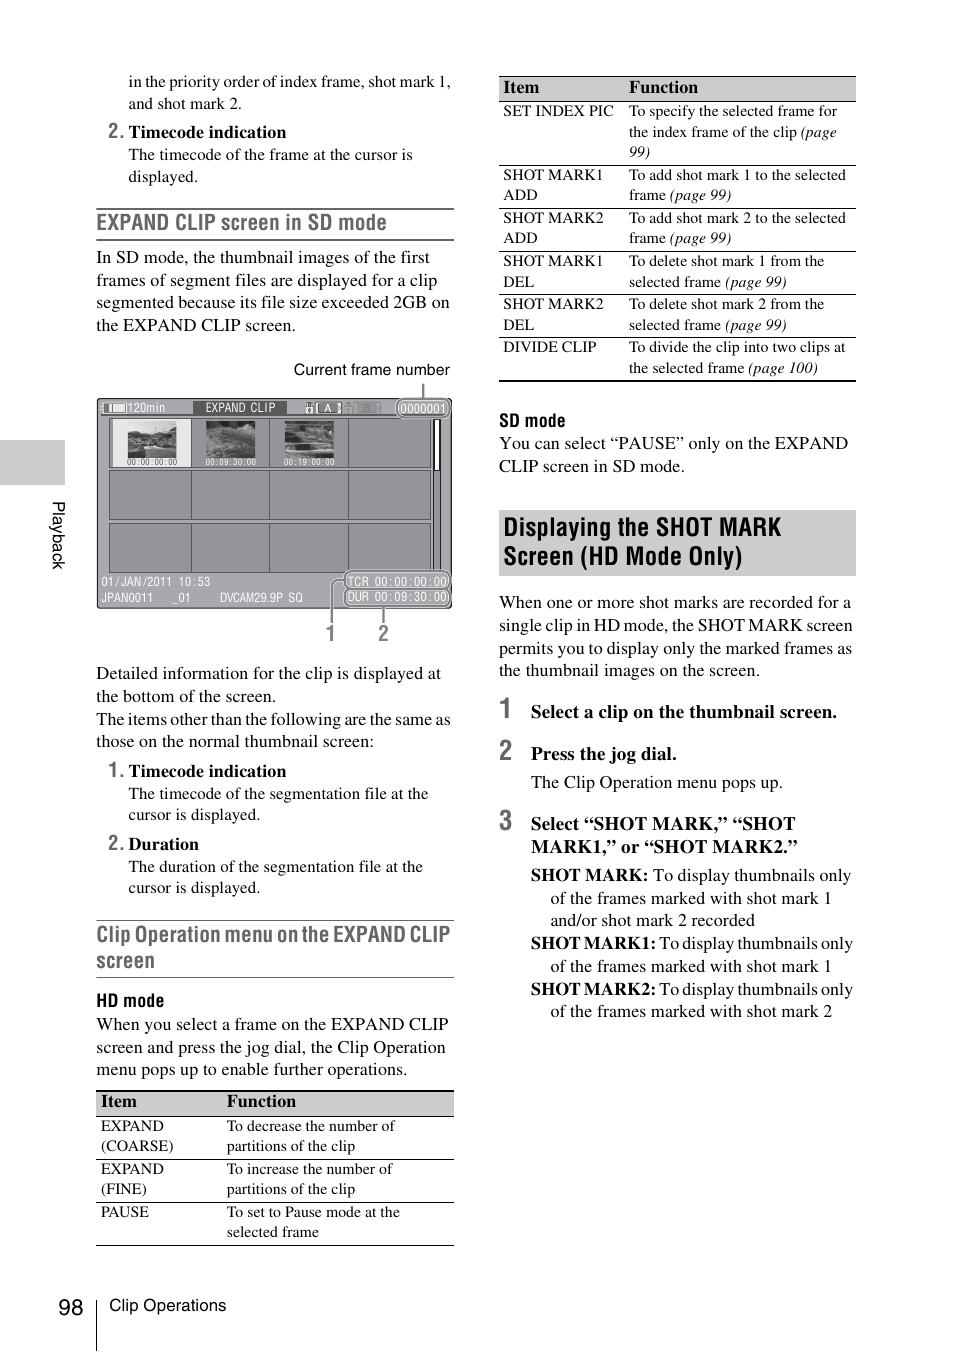 Displaying the shot mark screen (hd mode only), Displaying the shot mark screen, Hd mode only) | Expand clip screen in sd mode, Clip operation menu on the expand clip screen | Sony PMW-F3K User Manual | Page 98 / 164